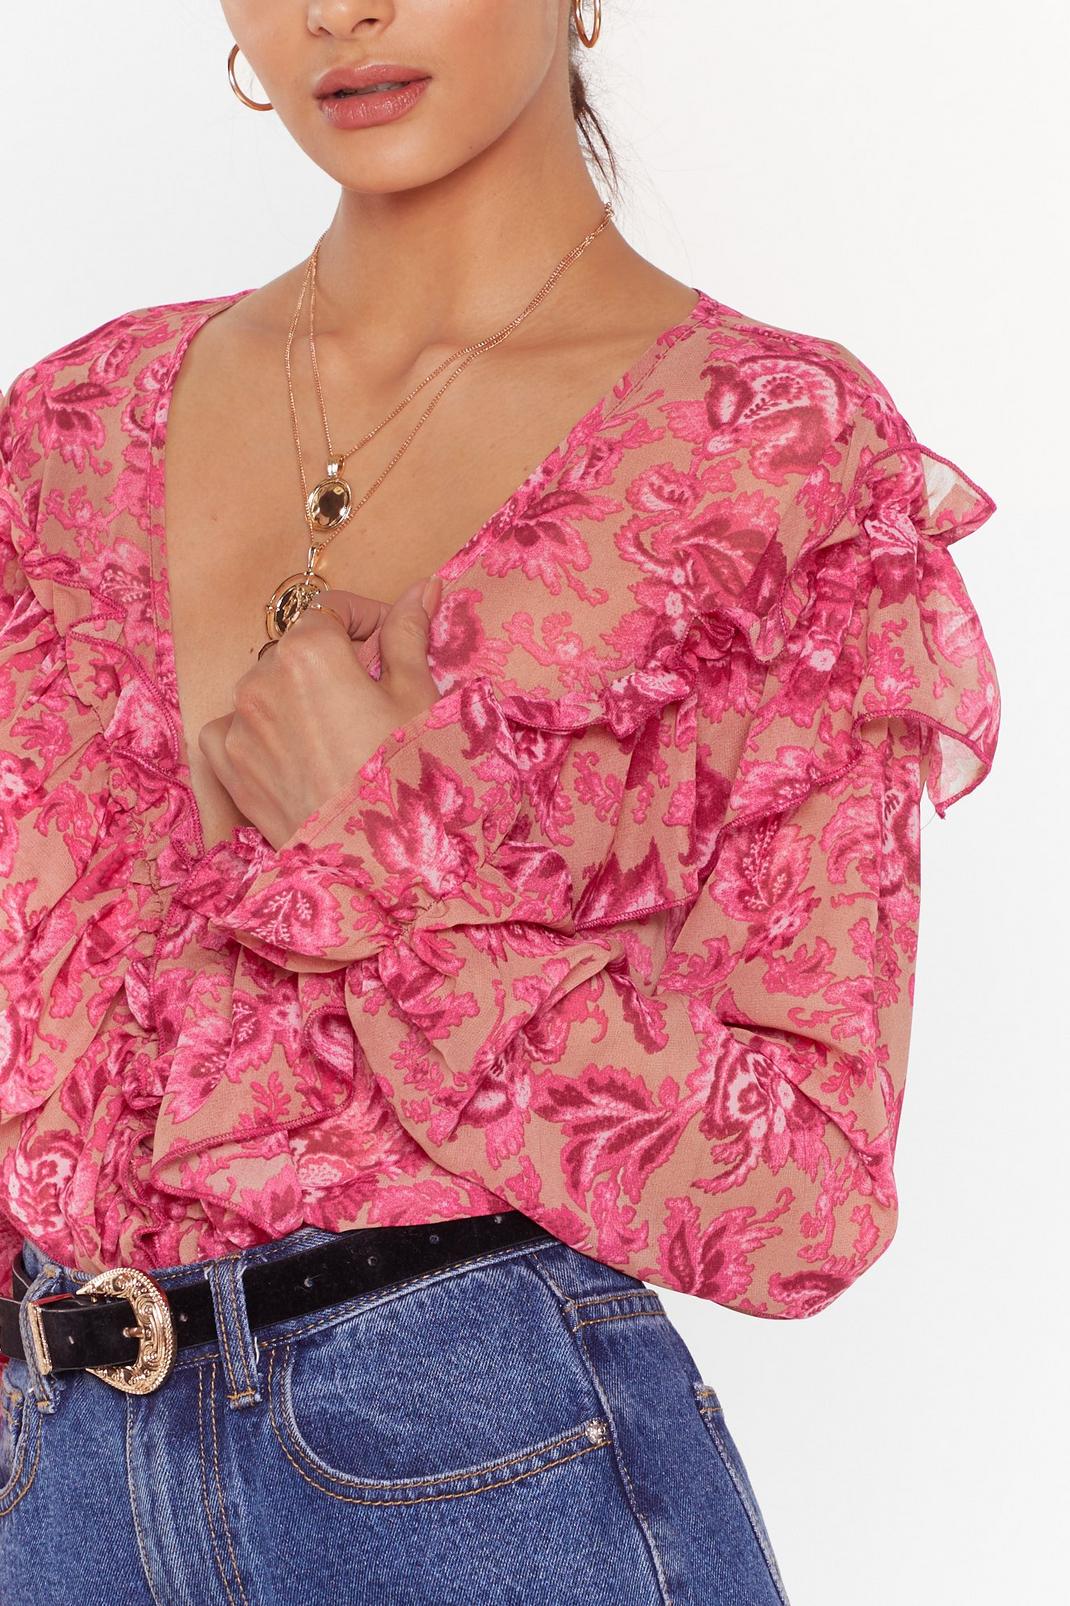 Cause a Stir Floral Ruffle Blouse | Nasty Gal